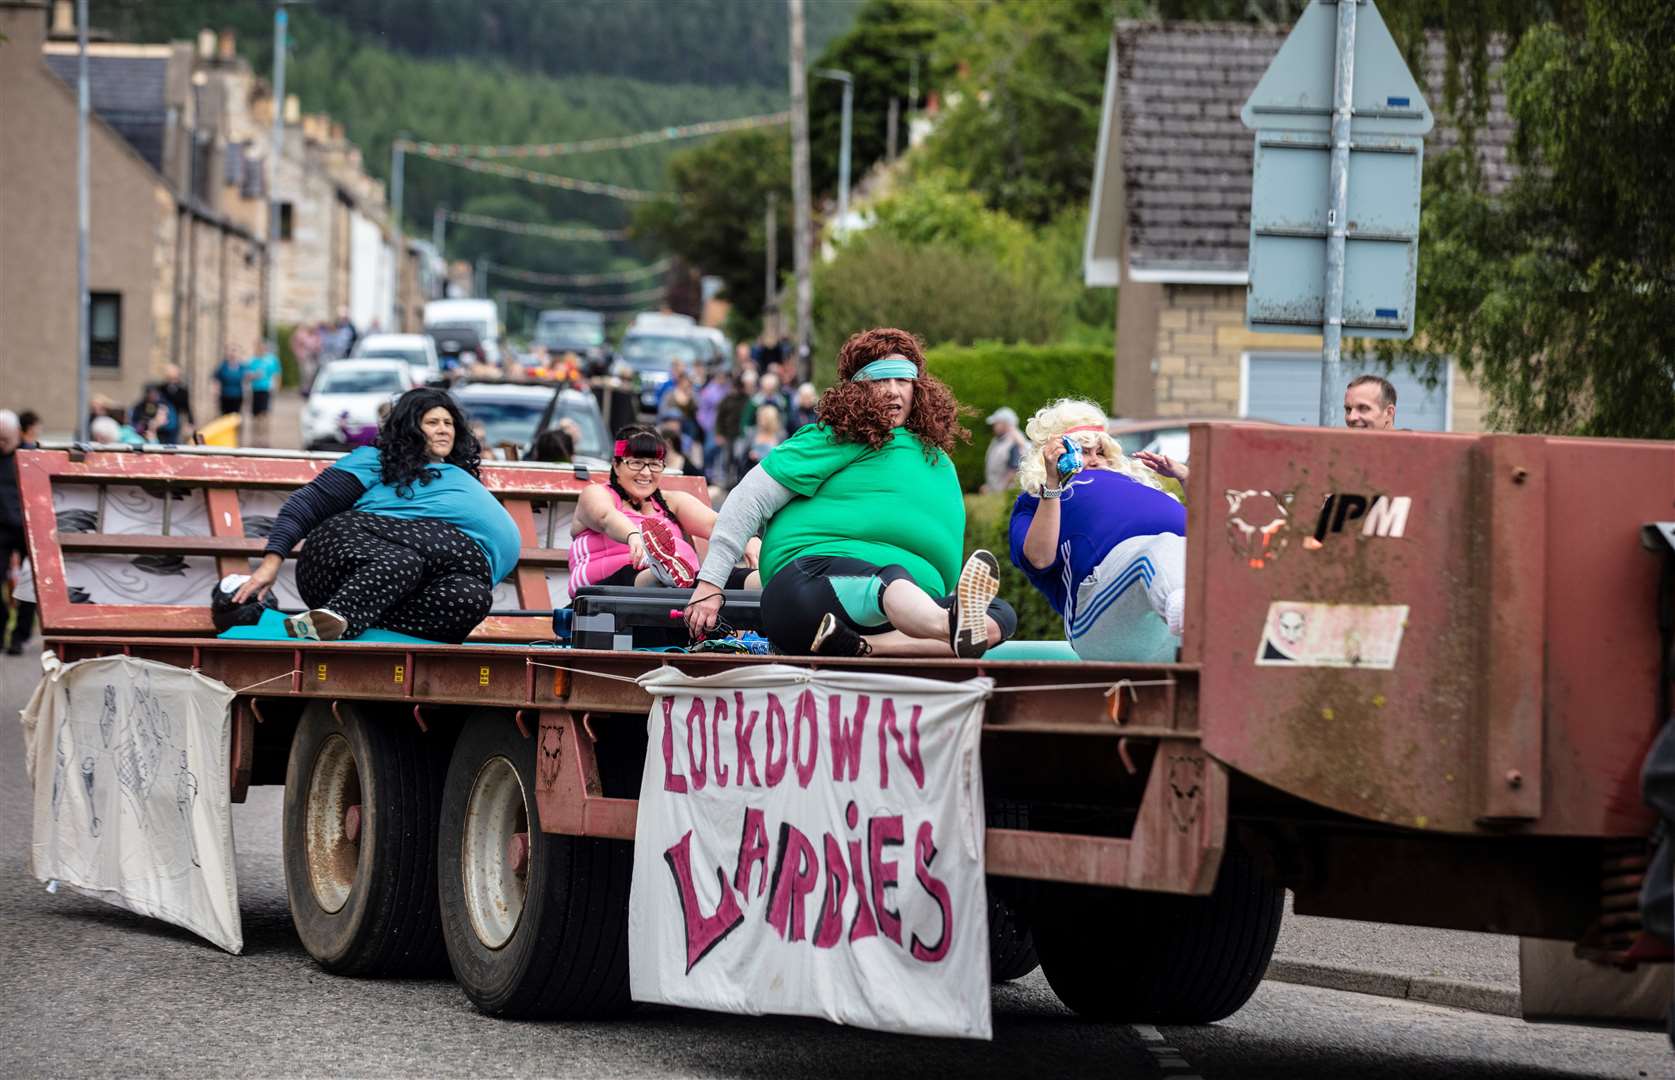 The competition for the best float was won by the Lockdown Lardies. Picture: Nick Gibbons